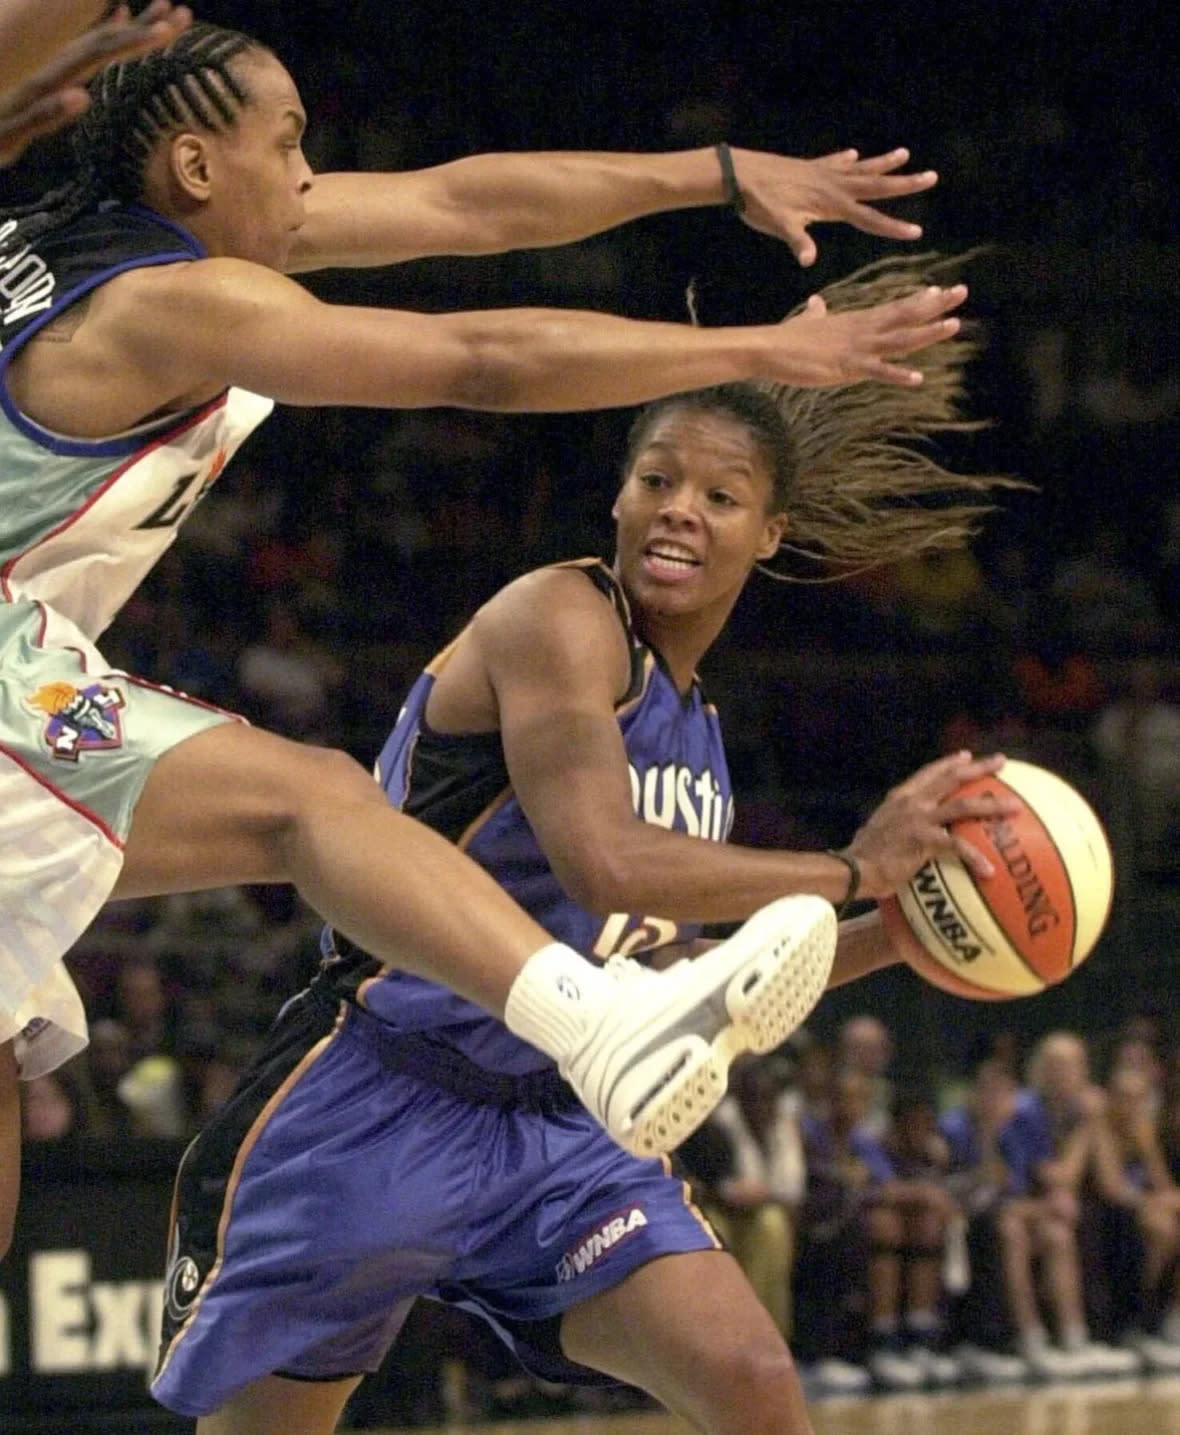 Washington Mystics’ Nikki McCray, right, is defended by New York Liberty’s Teresa Weatherspoon during the first half Saturday, June 16, 2001 in New York. (AP Photo/Mark Lennihan, File)